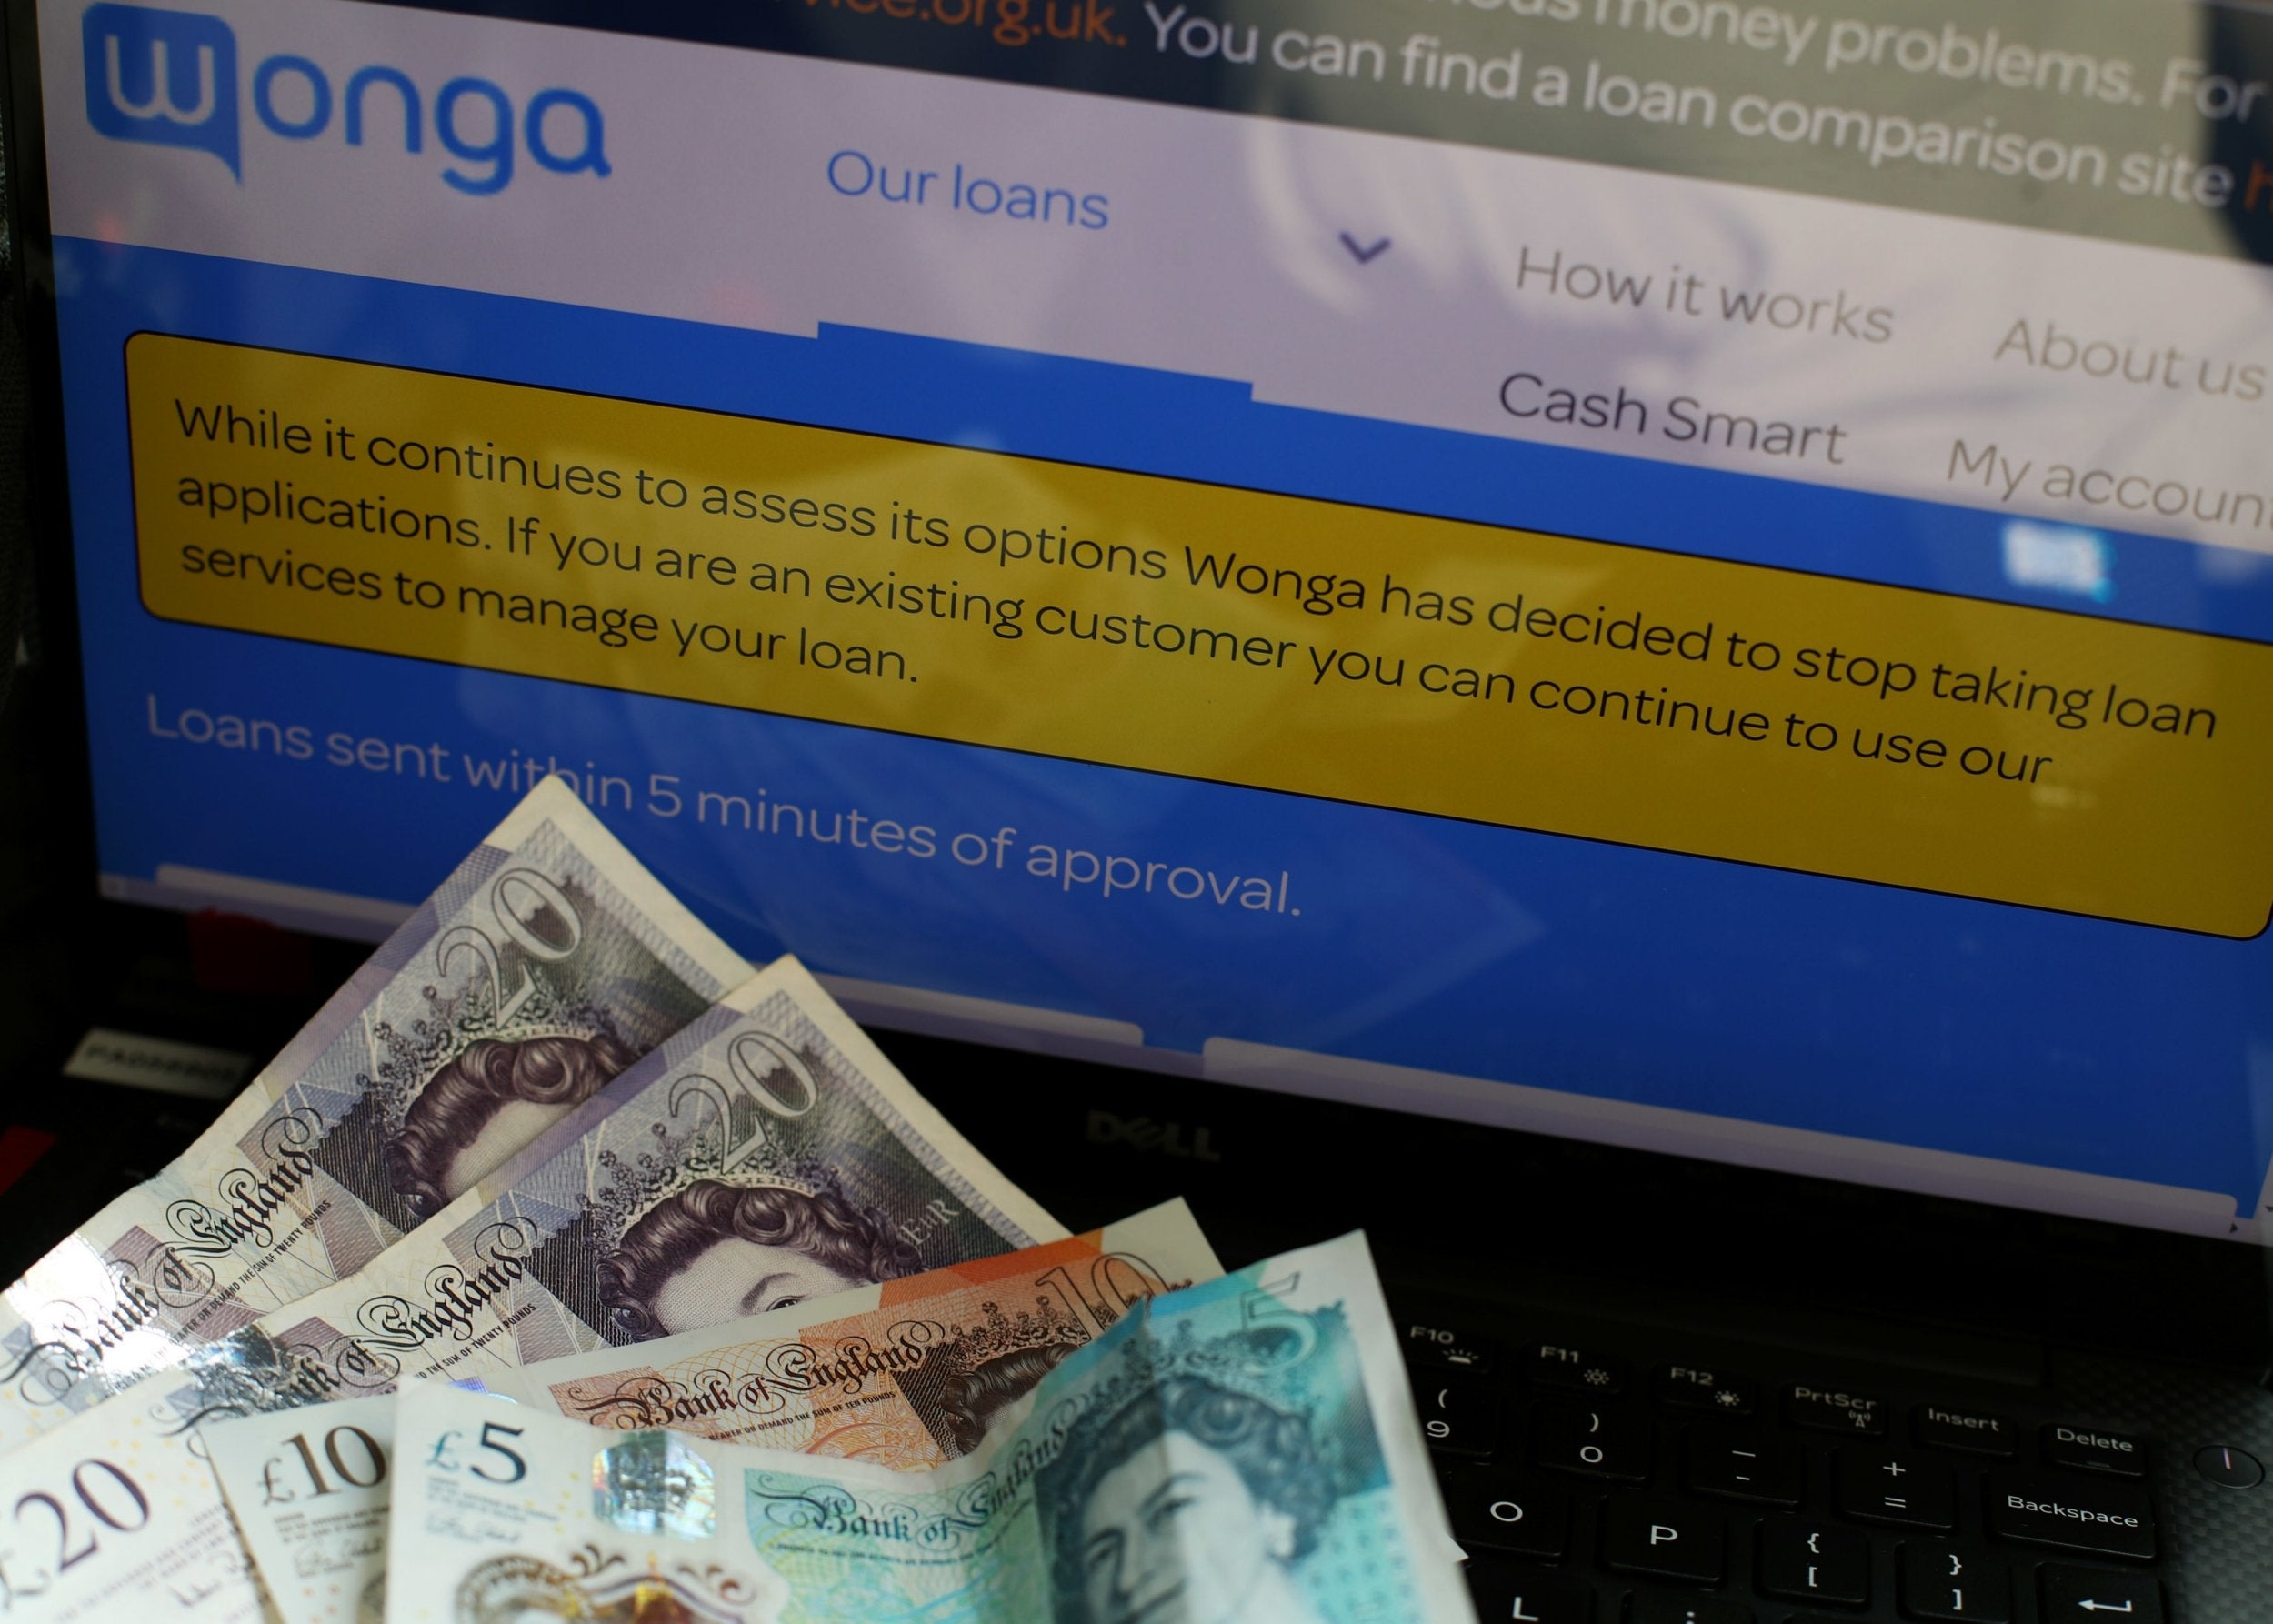 Warning comes after payday lender Wonga went bust due to rising number of complaints